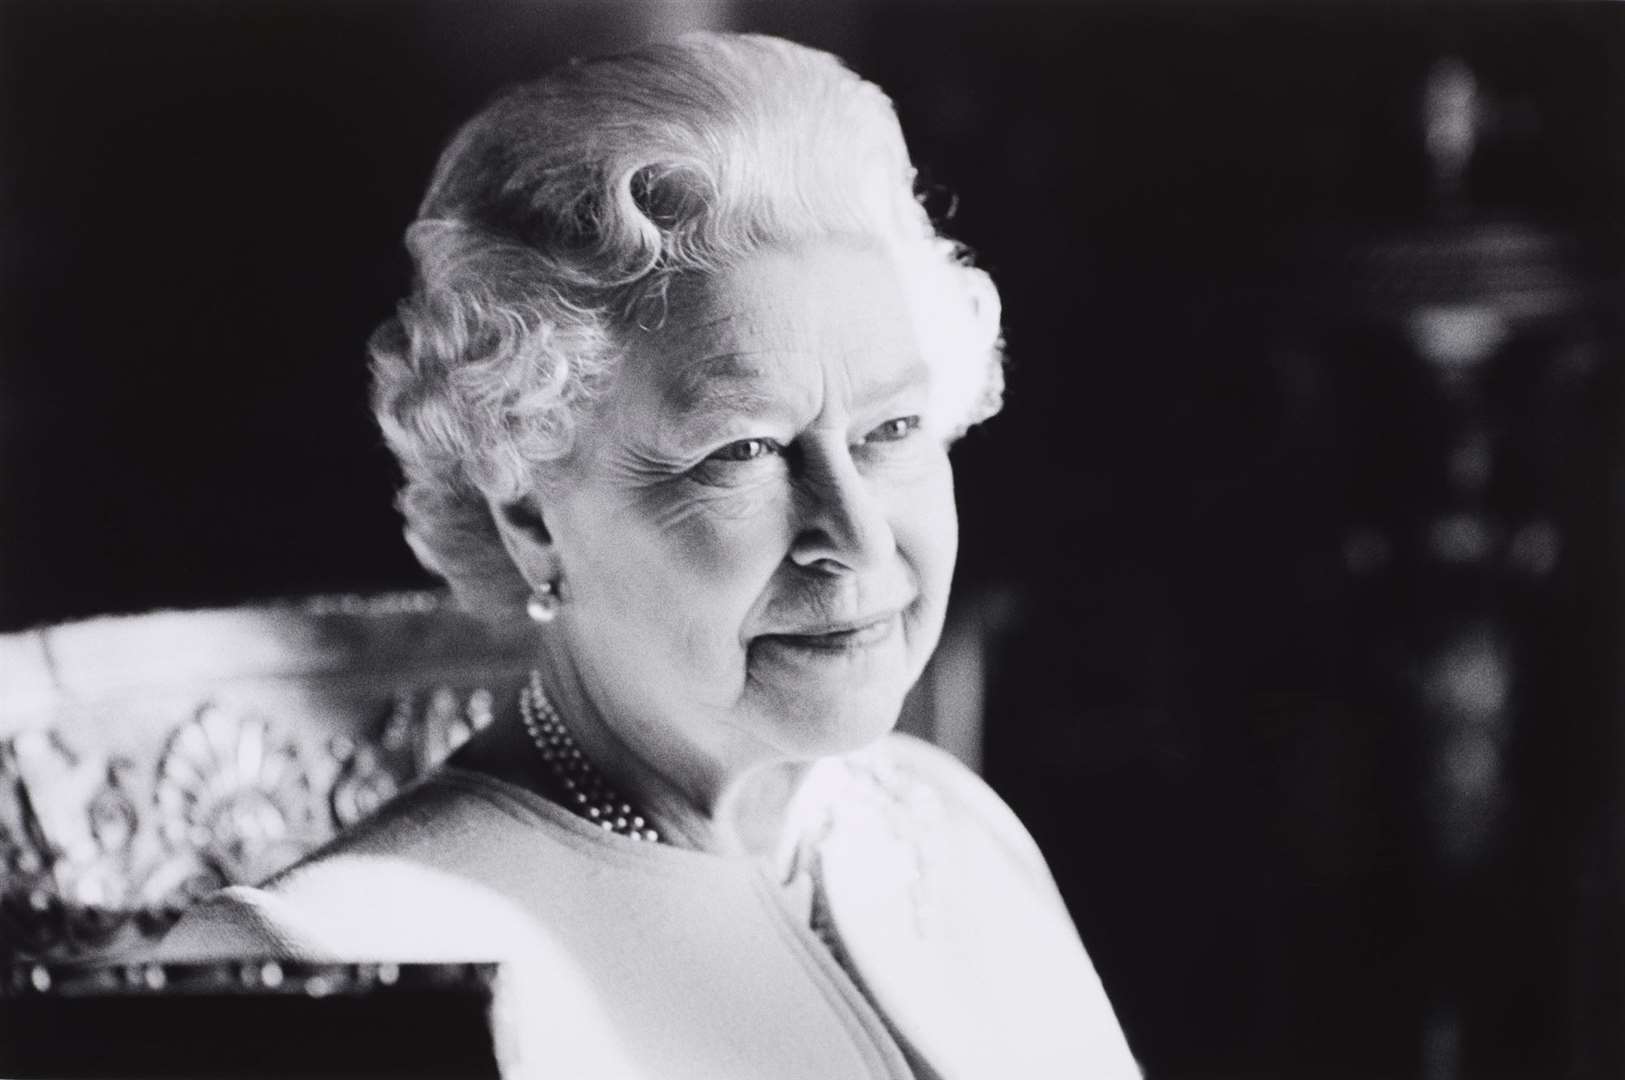 The Queen's funeral is taking place on Monday.